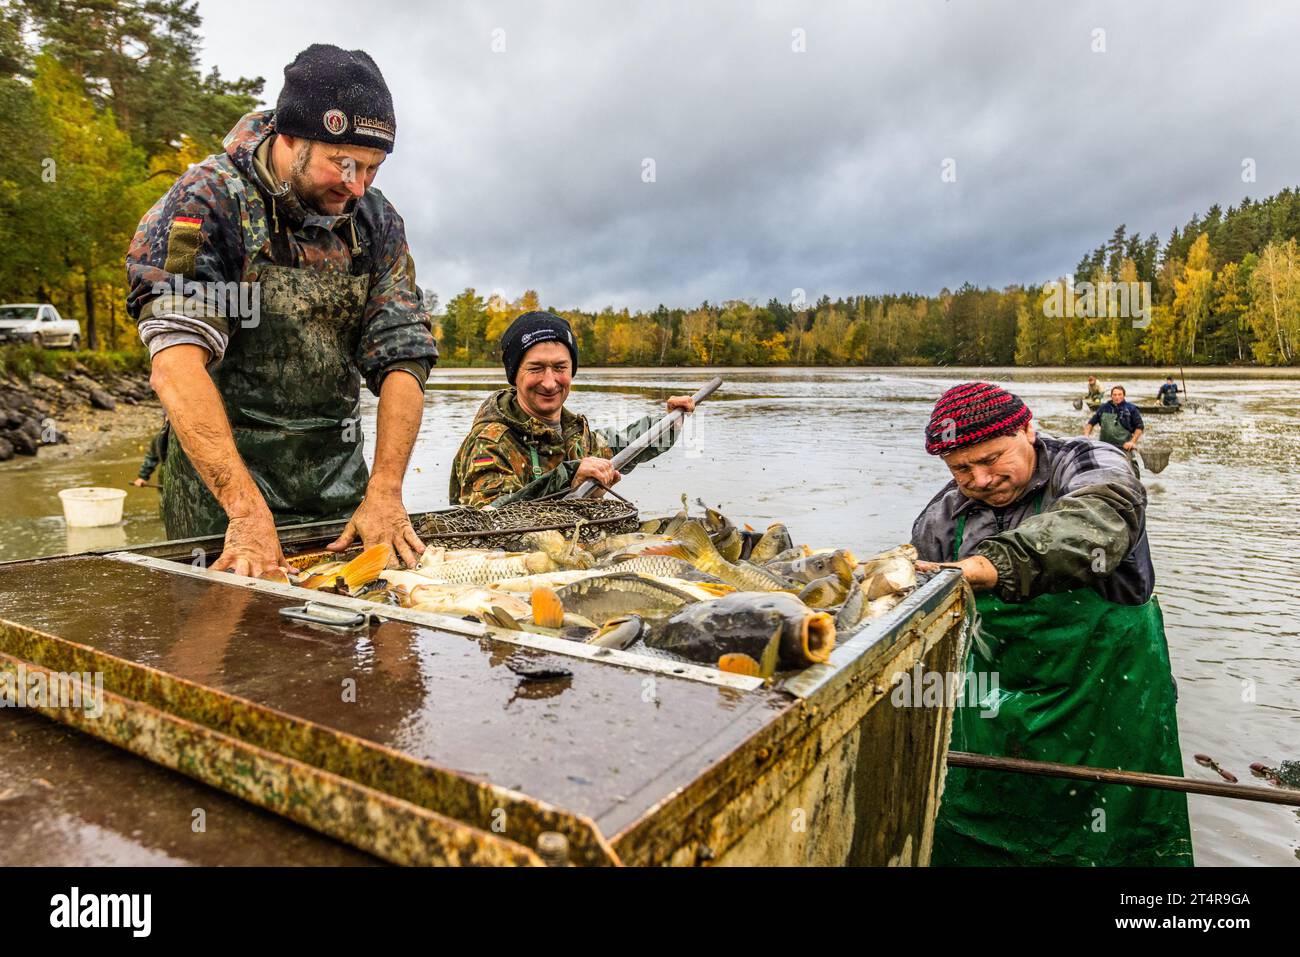 Fishing for carp in the Upper Palatinate. People have been farming fish in the Tirschenreuth region since the 13th century. In the fall, the ponds are emptied and the fish are placed in water basins before they are sold or slaughtered. Wiesau (VGem), Germany Stock Photo